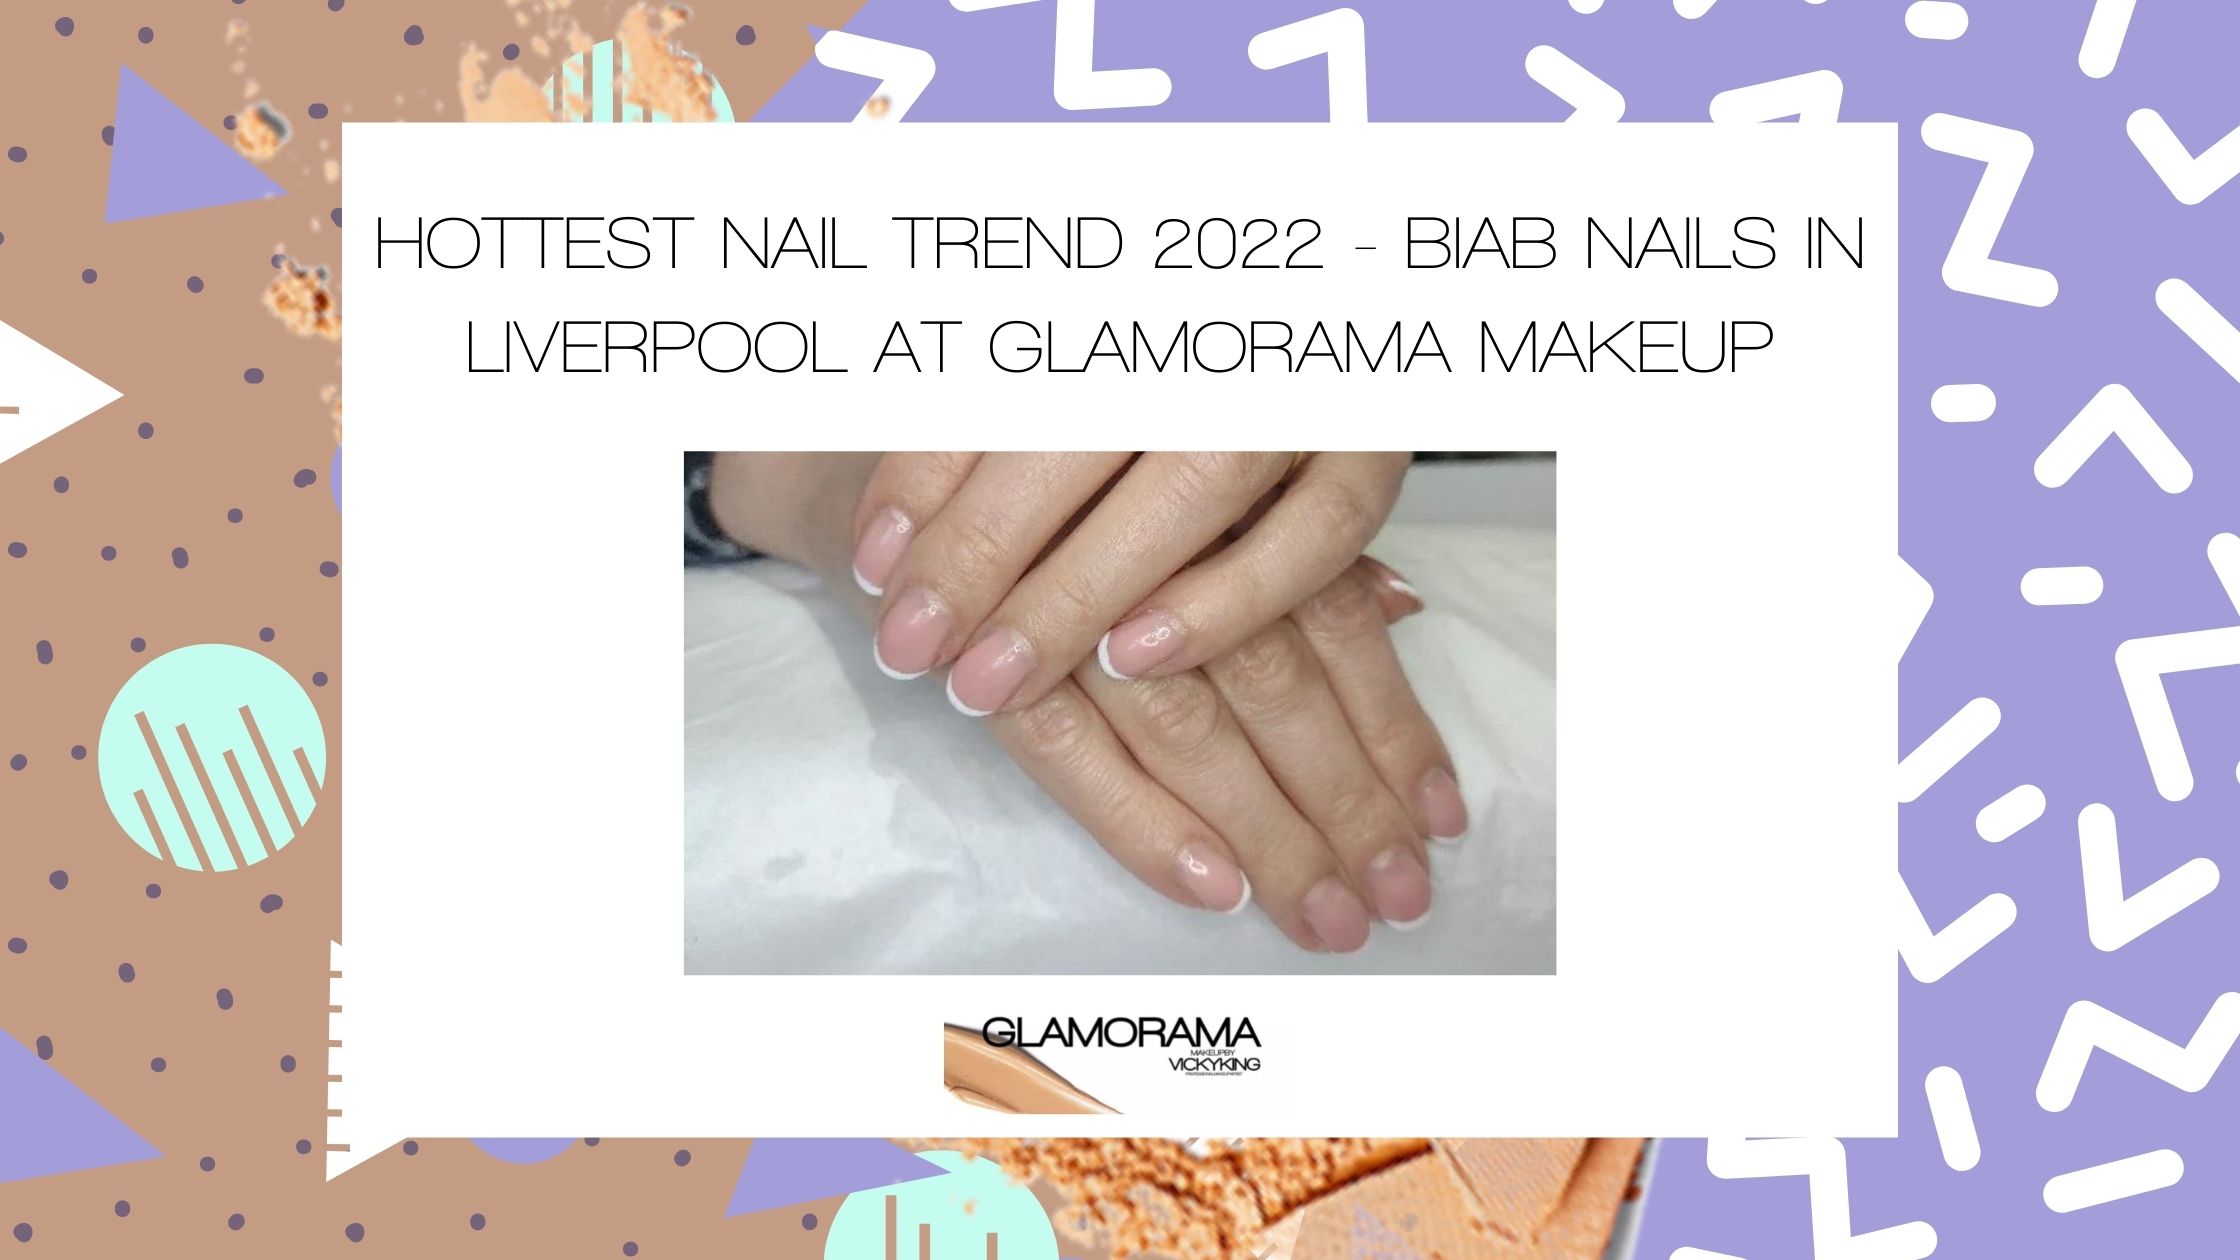 Hottest Nail Trend 2022 - BIAB Nails in Liverpool at Glamorama Makeup